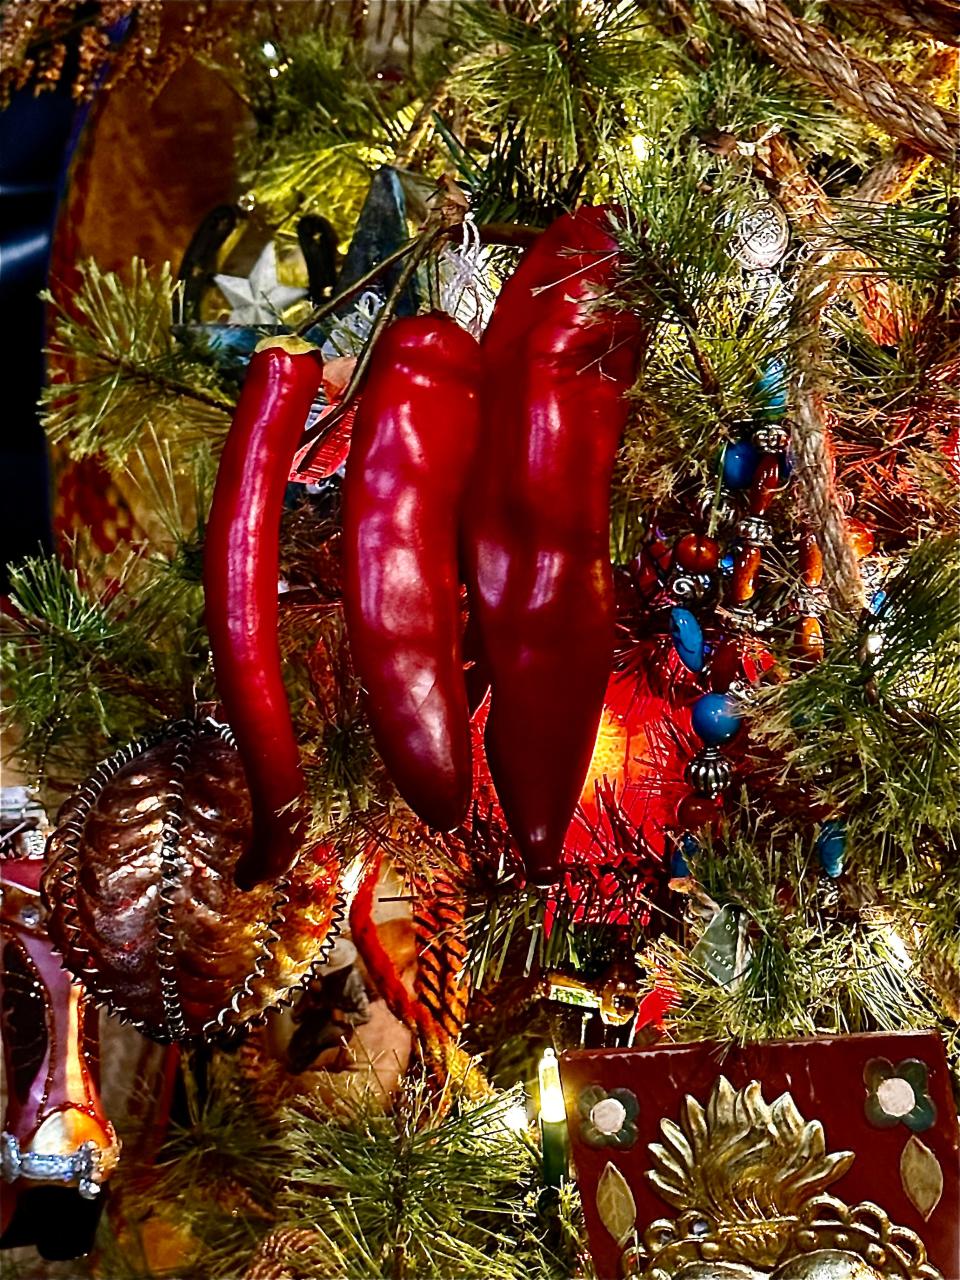 Decorations are seen on the New Mexico-themed tree at Ku-Tips Nursery & Gift Shop in Farmington.